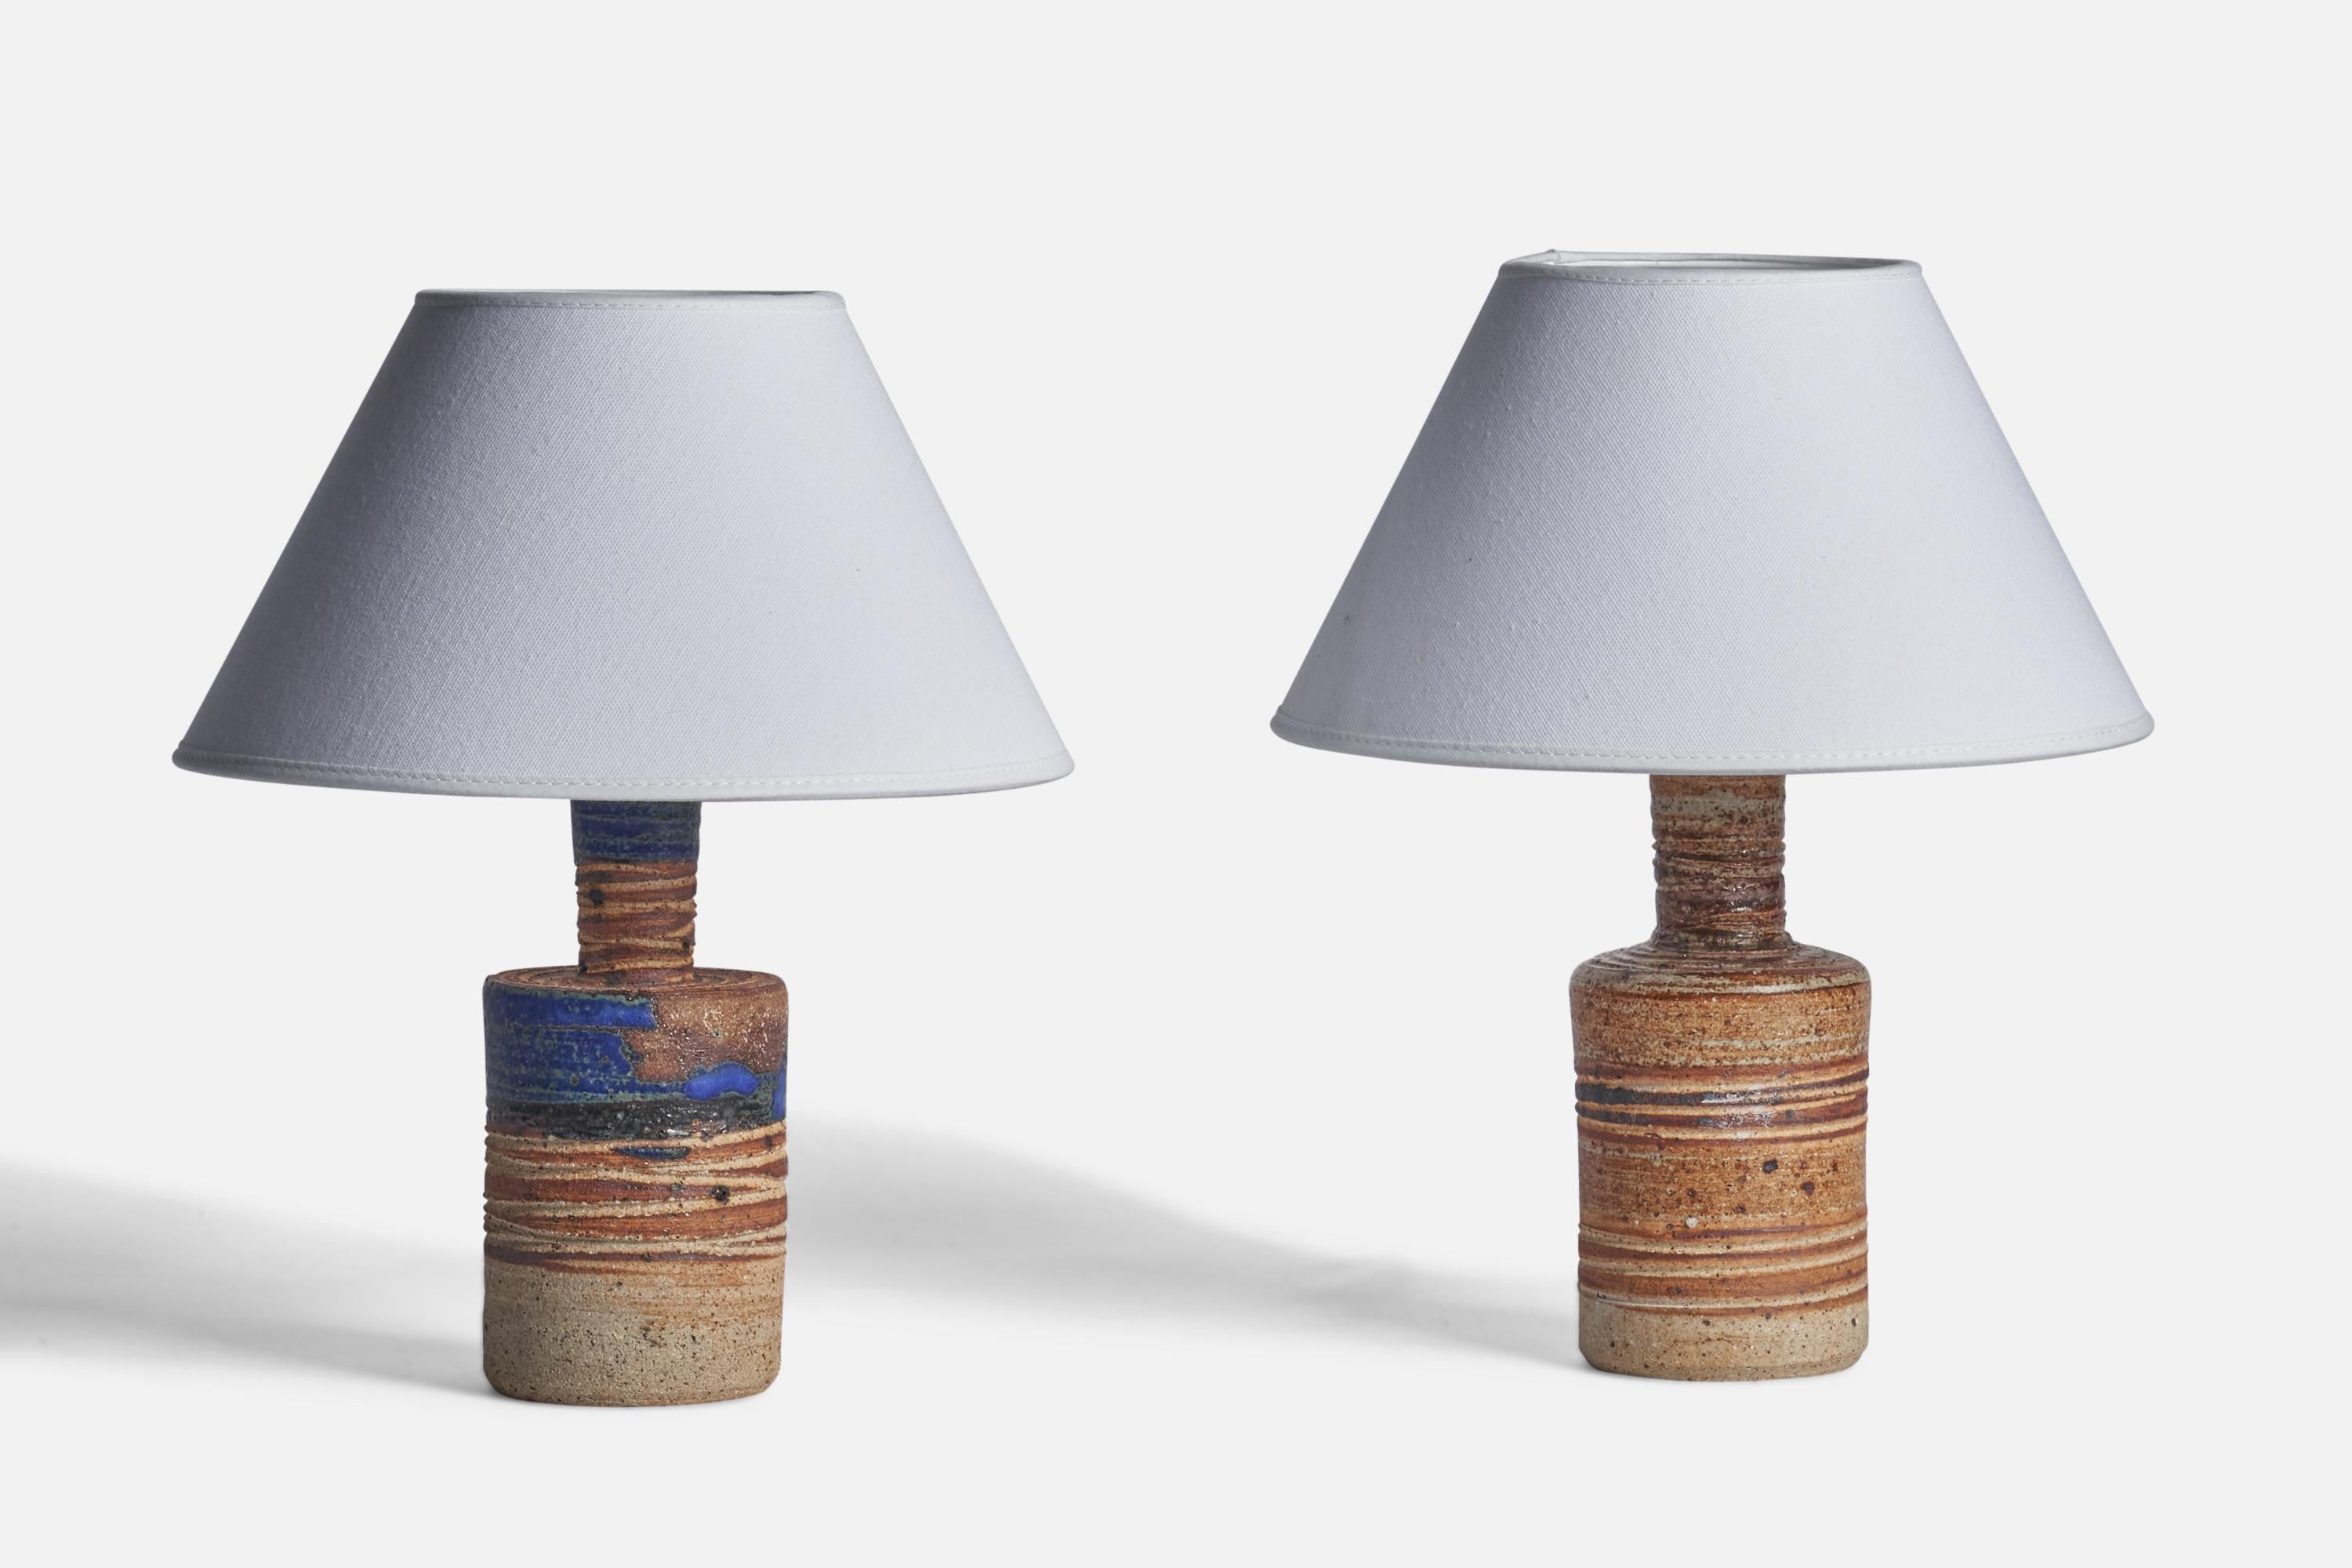 A pair of blue and brown-glazed stoneware table lamps designed and produced by Tue Poulsen, Sweden, 1960s.

Dimensions of Lamp (inches): 9.15